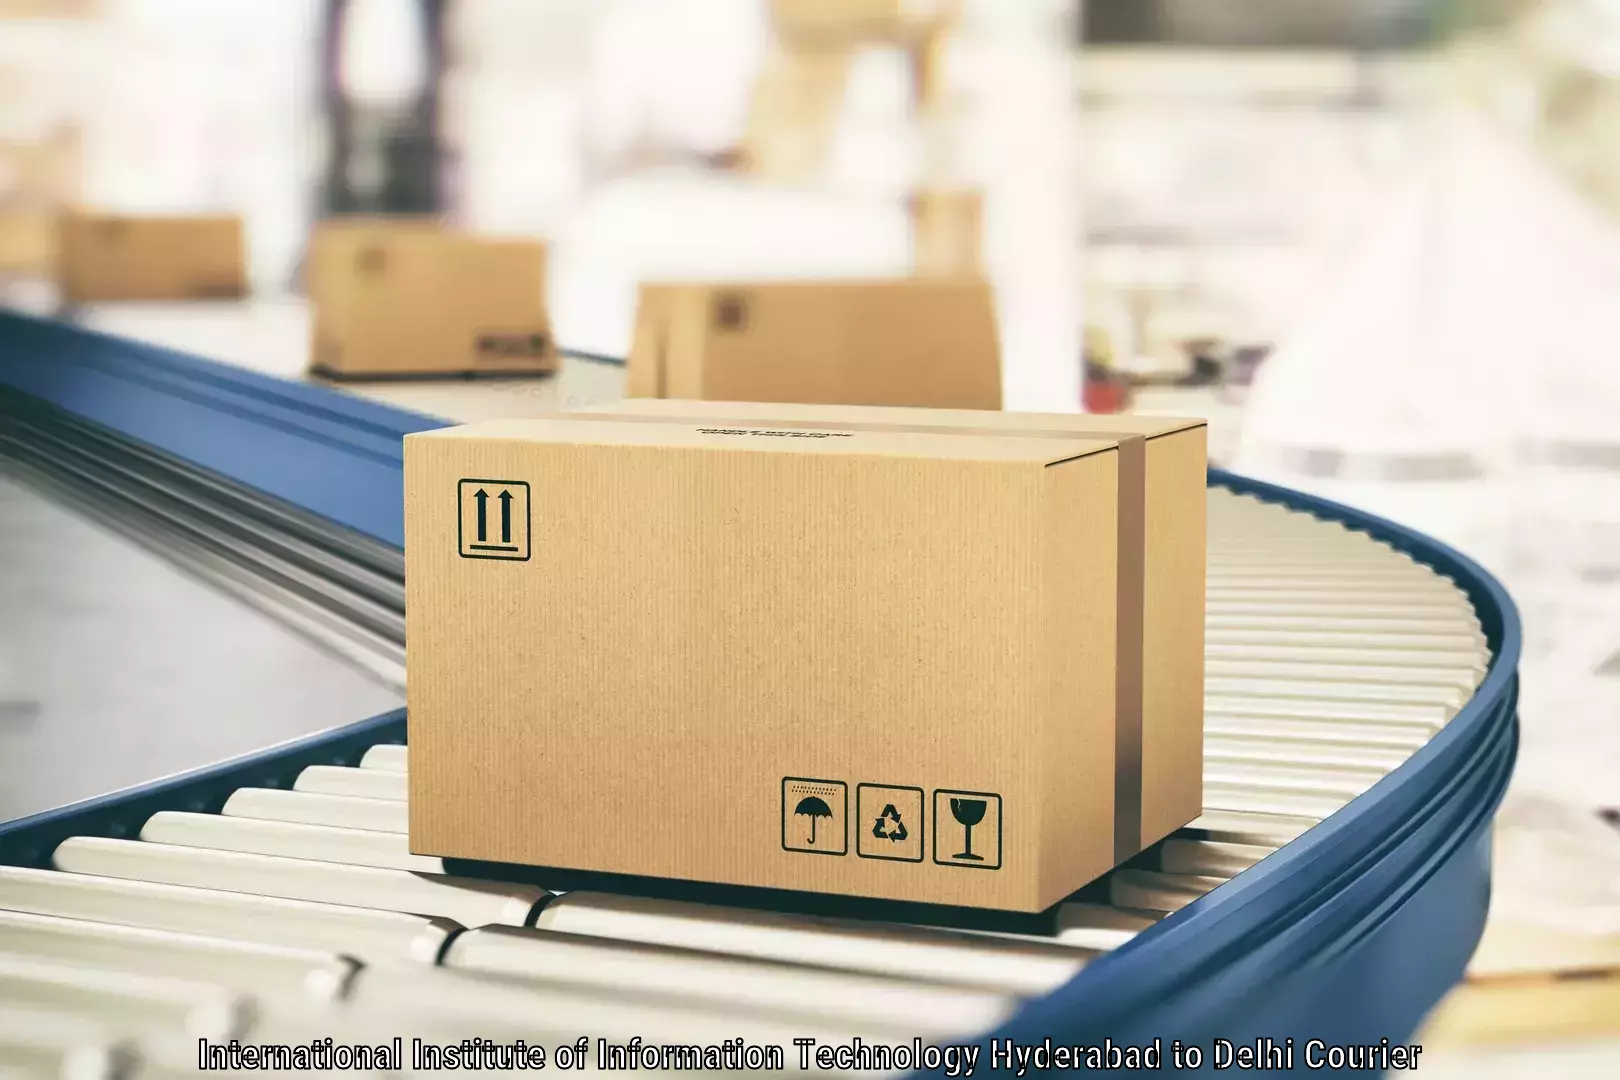 Individual parcel service International Institute of Information Technology Hyderabad to NCR